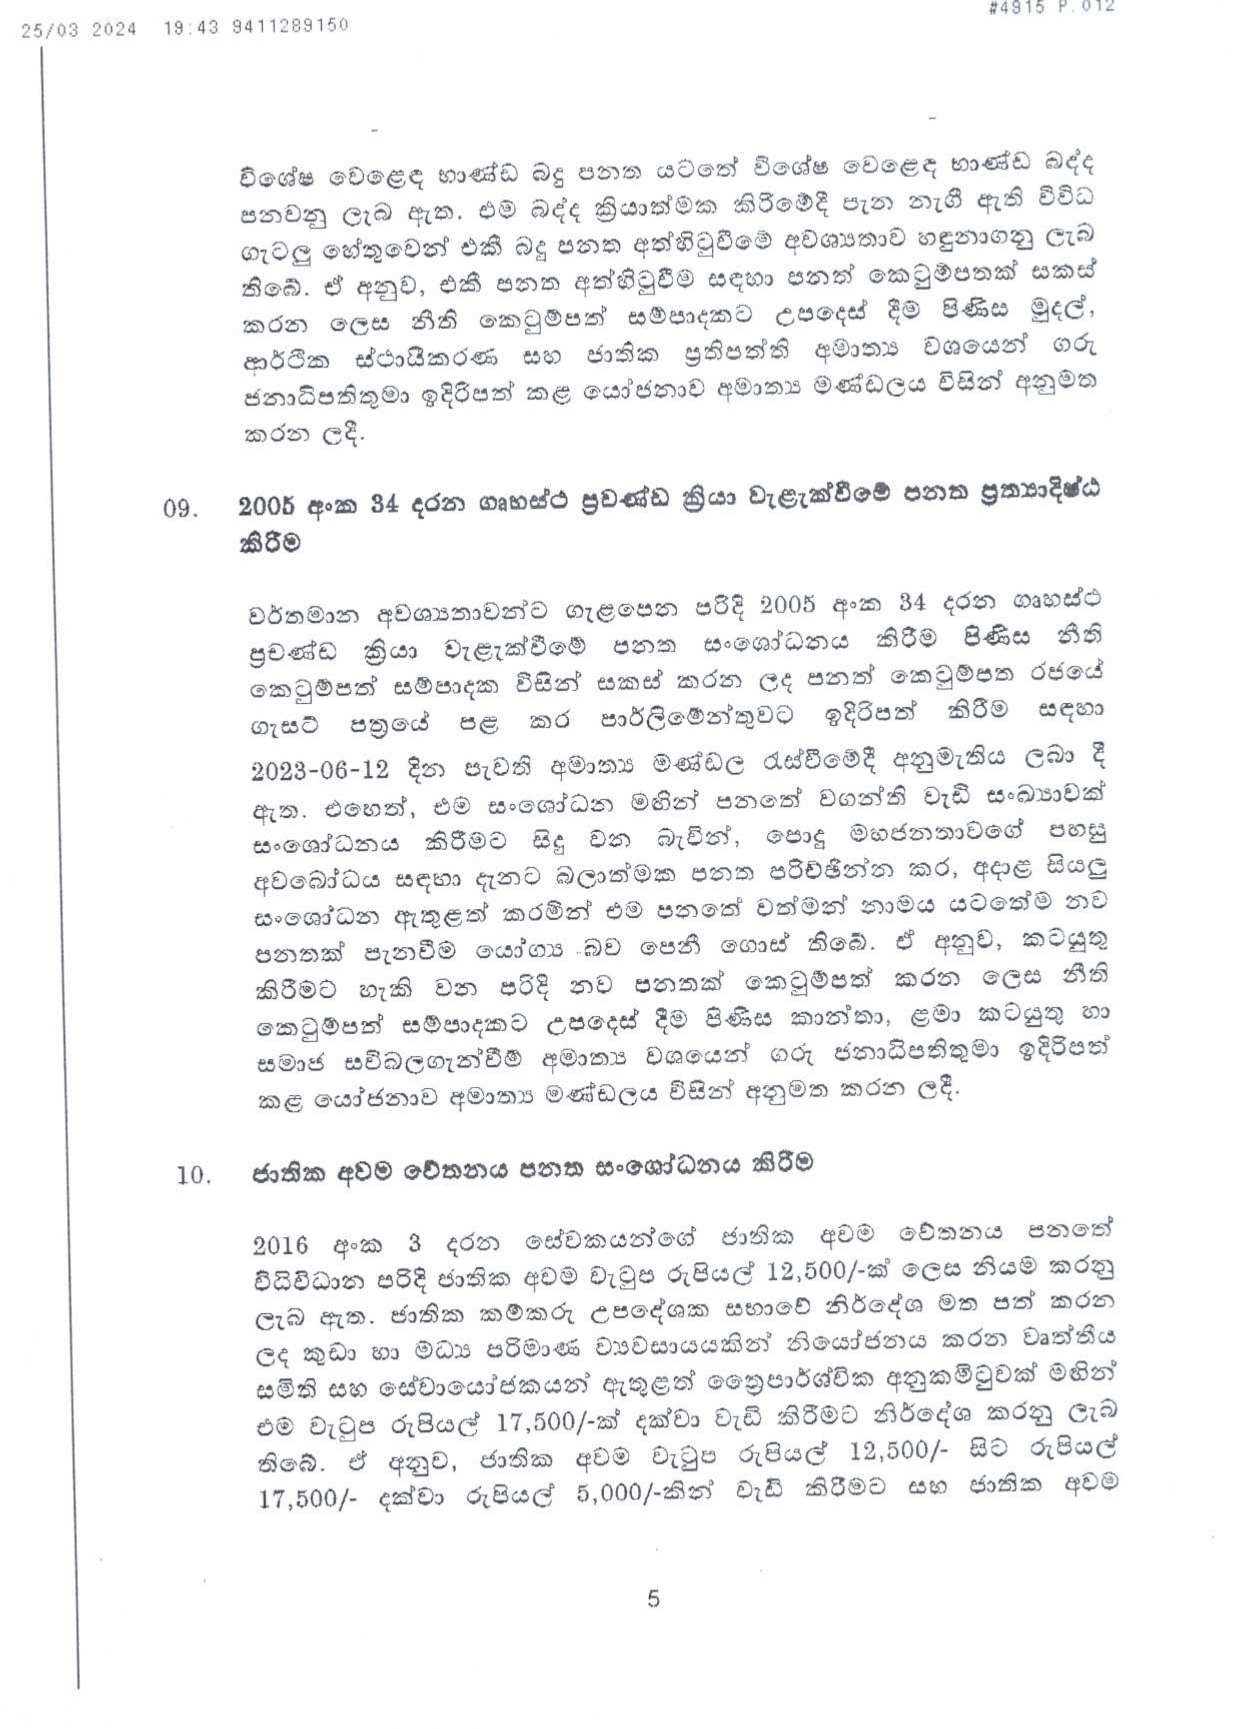 Cabinet Decision on 25.03.2024 page 00051